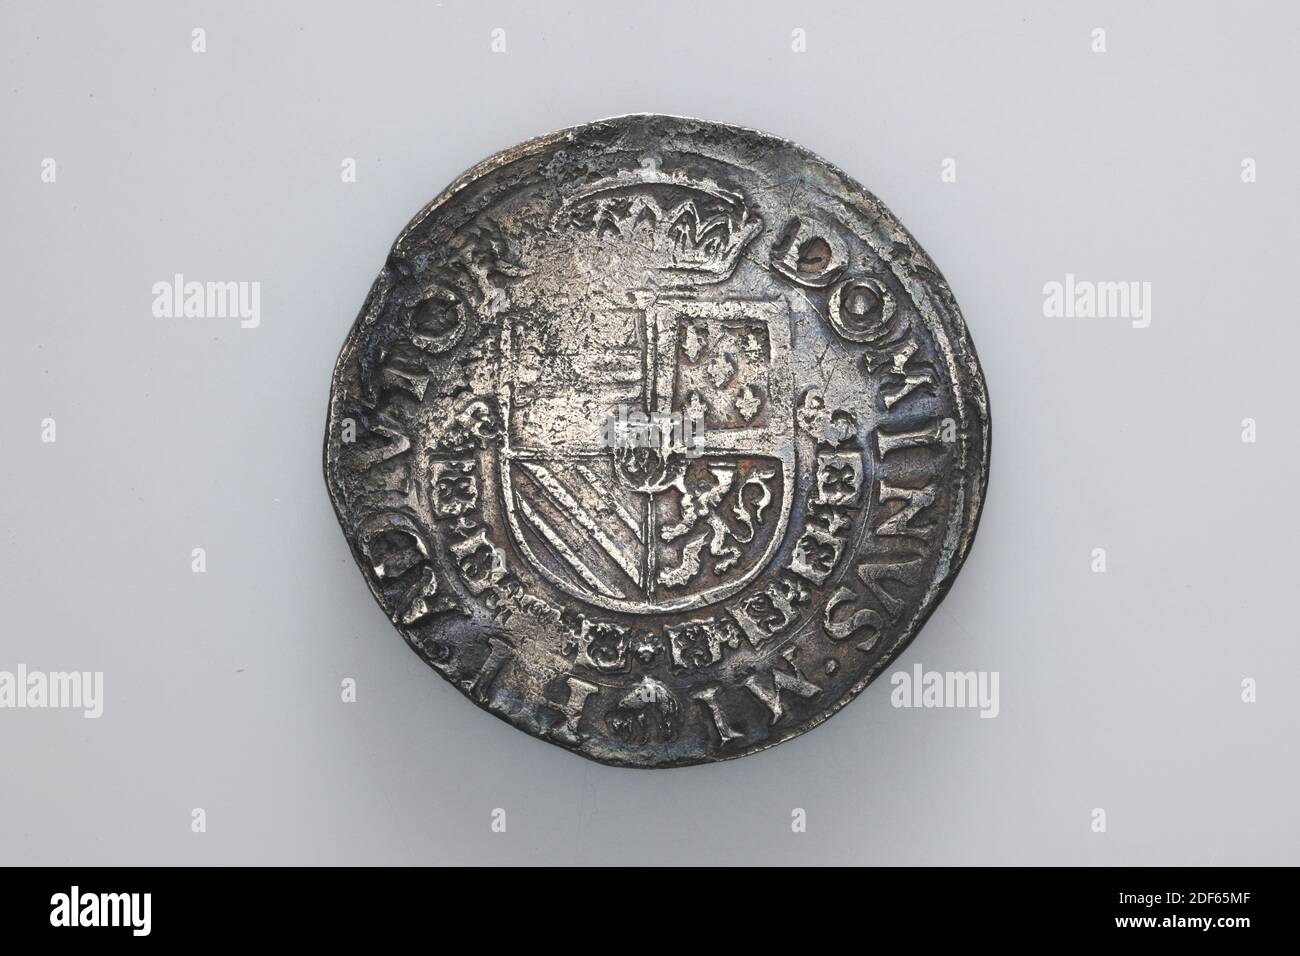 coin swap, Anonymous, 1569, minted, General: 3.8 x 0.2cm 38 x 2mm, Weight: 28.1g, weapon sign, cross, Silver coin of King Philips II, minted in 1569. On the obverse is a central Burgundian cross depicted. The year 1569 is written on both sides. Around it is the circular PHS D G HISP REX [worn] C HOL. On the reverse is a crowned coat of arms with the chain of the Golden Fleece around it, with the sheepskin hanging at the bottom. It is surrounded by the circular DOMINUS MI HI ACIVIOR, 1926 Stock Photo